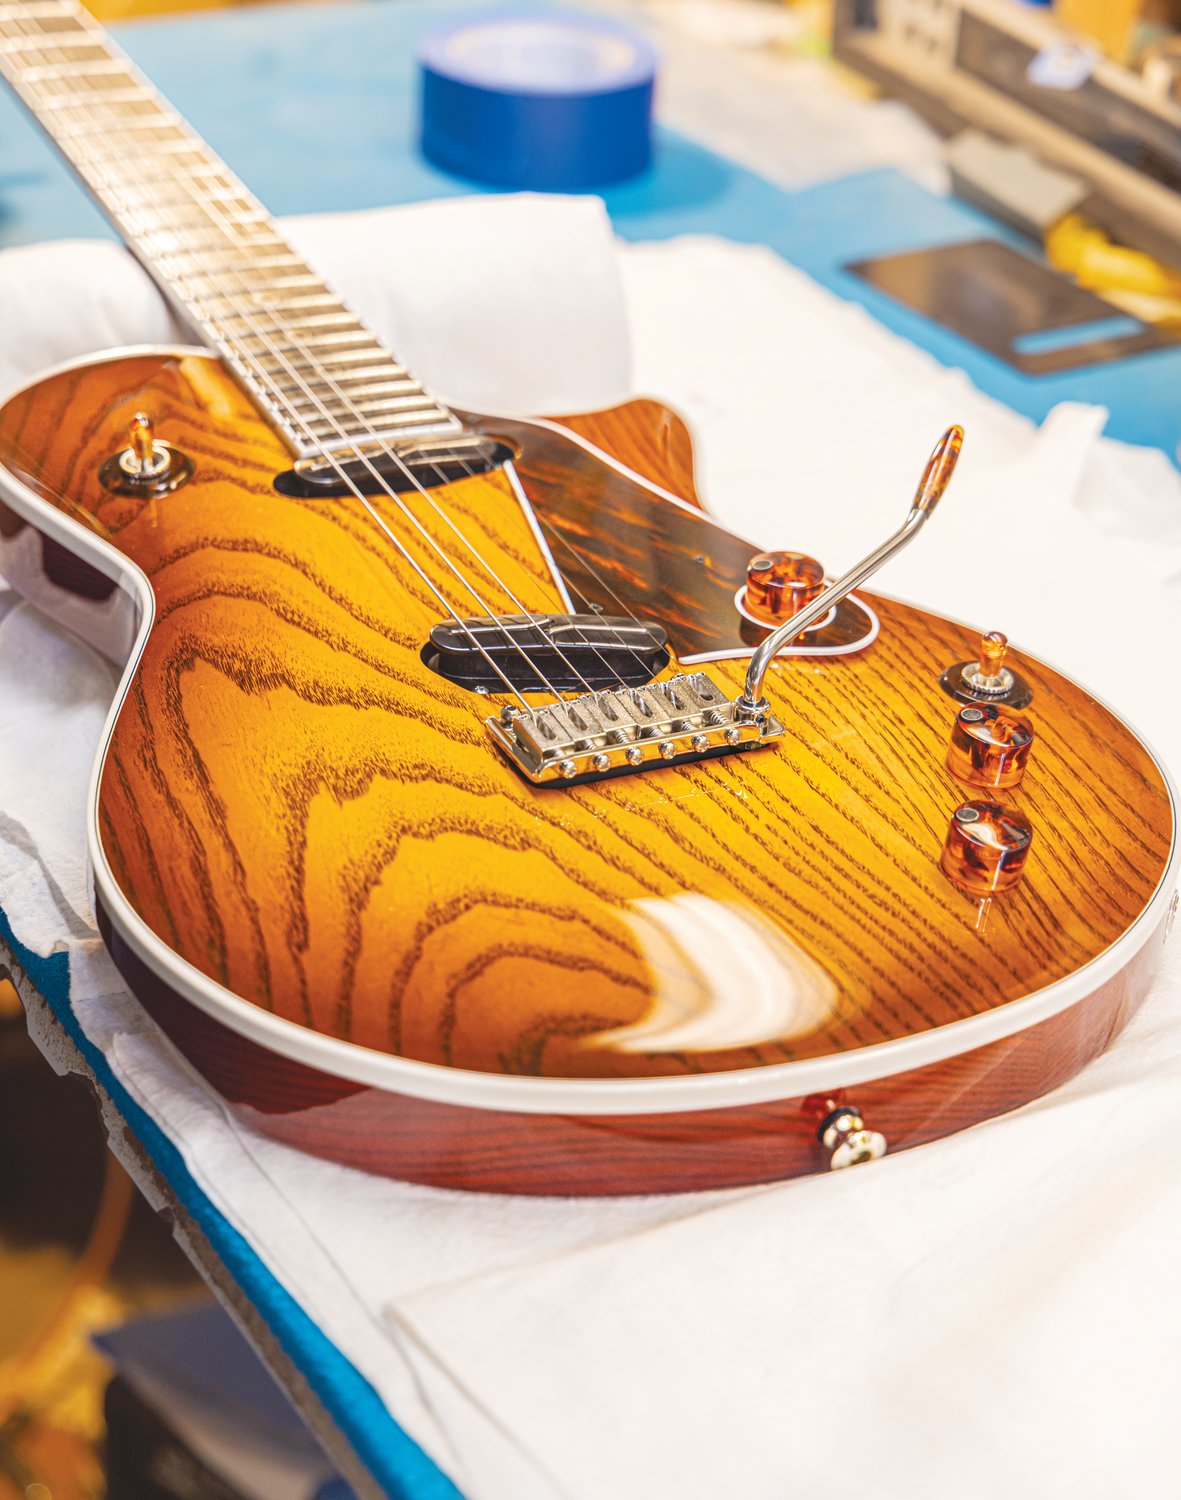 Terry McInturff's guitars are hand-crafted for performance — and, as evident here, beauty.